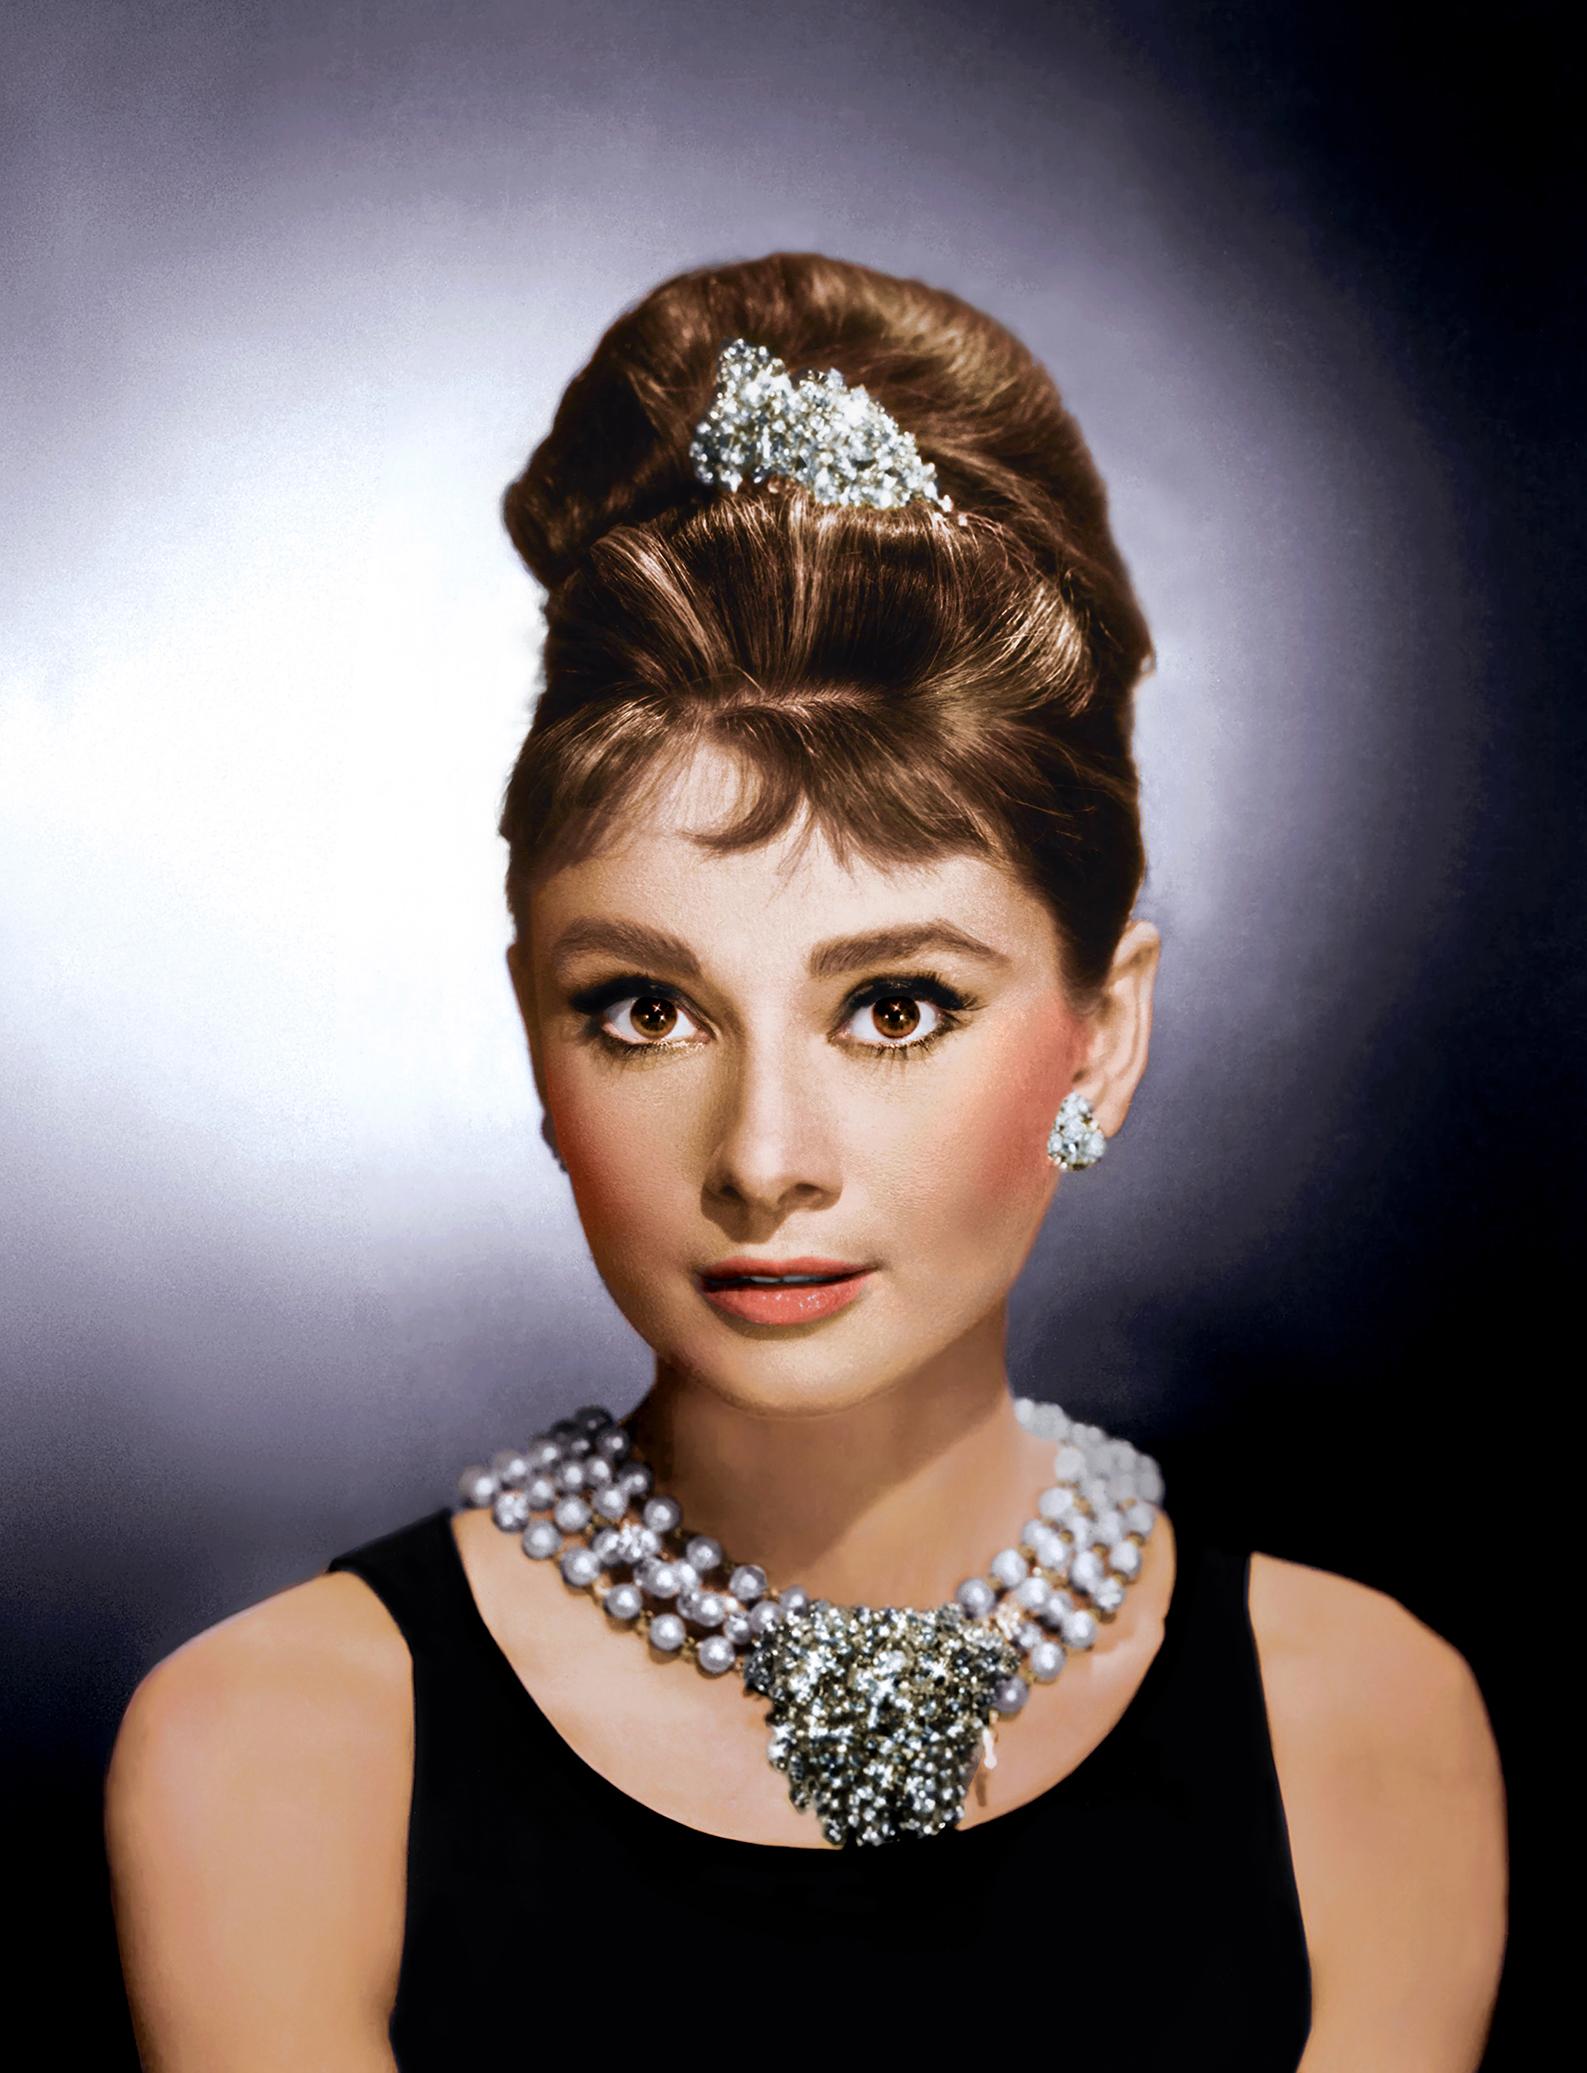 Unknown Color Photograph - Audrey Hepburn "Breakfast at Tiffany's"